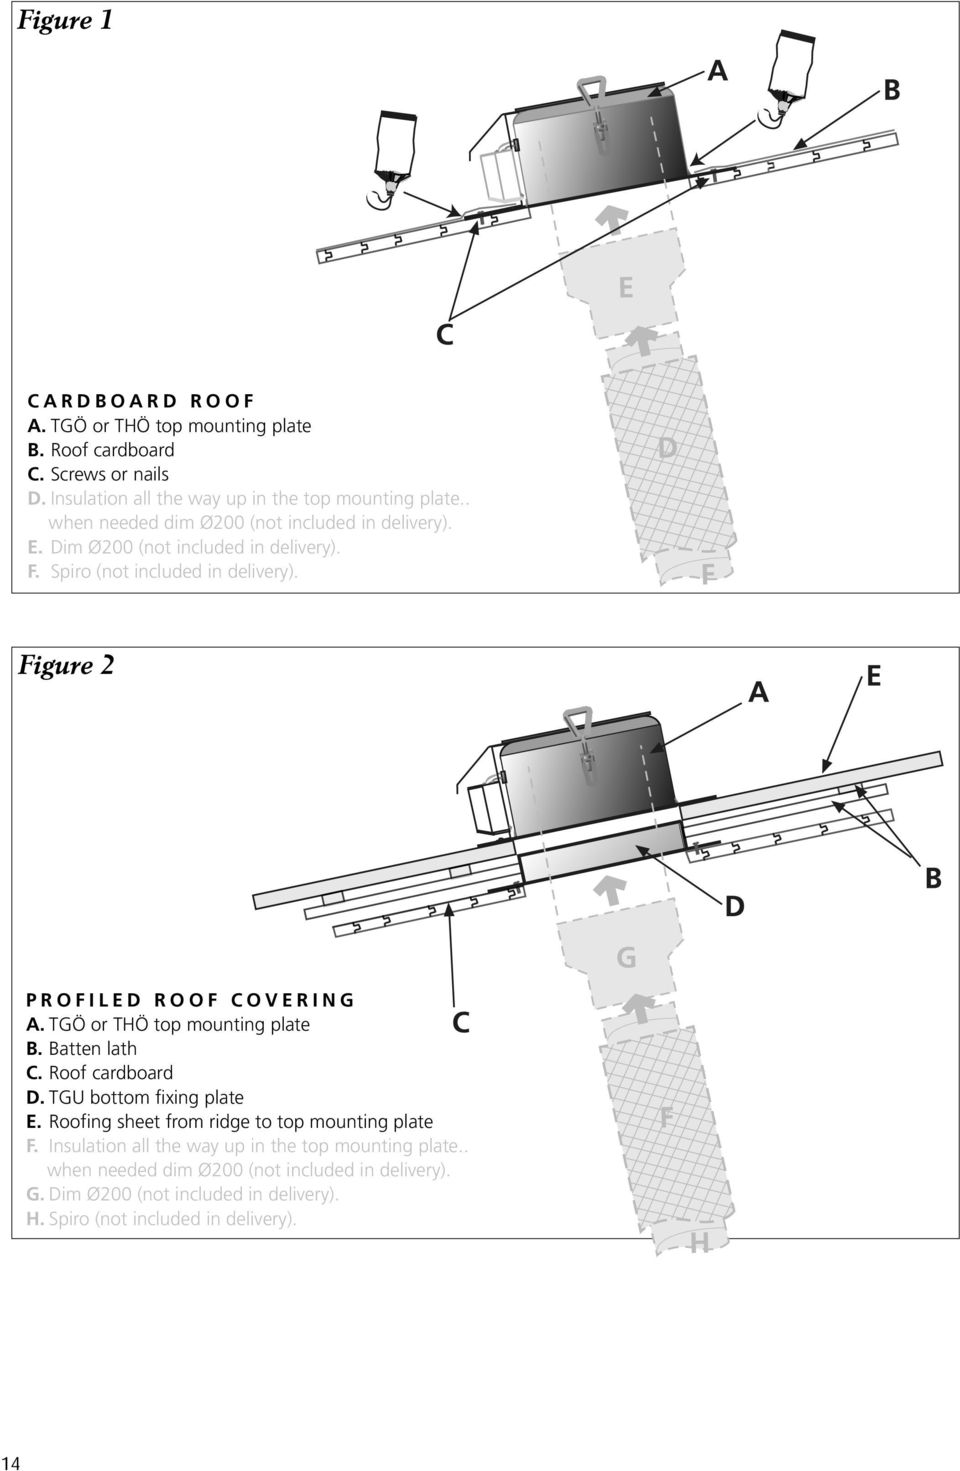 Figure 2 PROFILED ROOF COVERING A. TGÖ or THÖ top mounting plate B. Batten lath C. Roof cardboard D. TGU bottom fixing plate E.